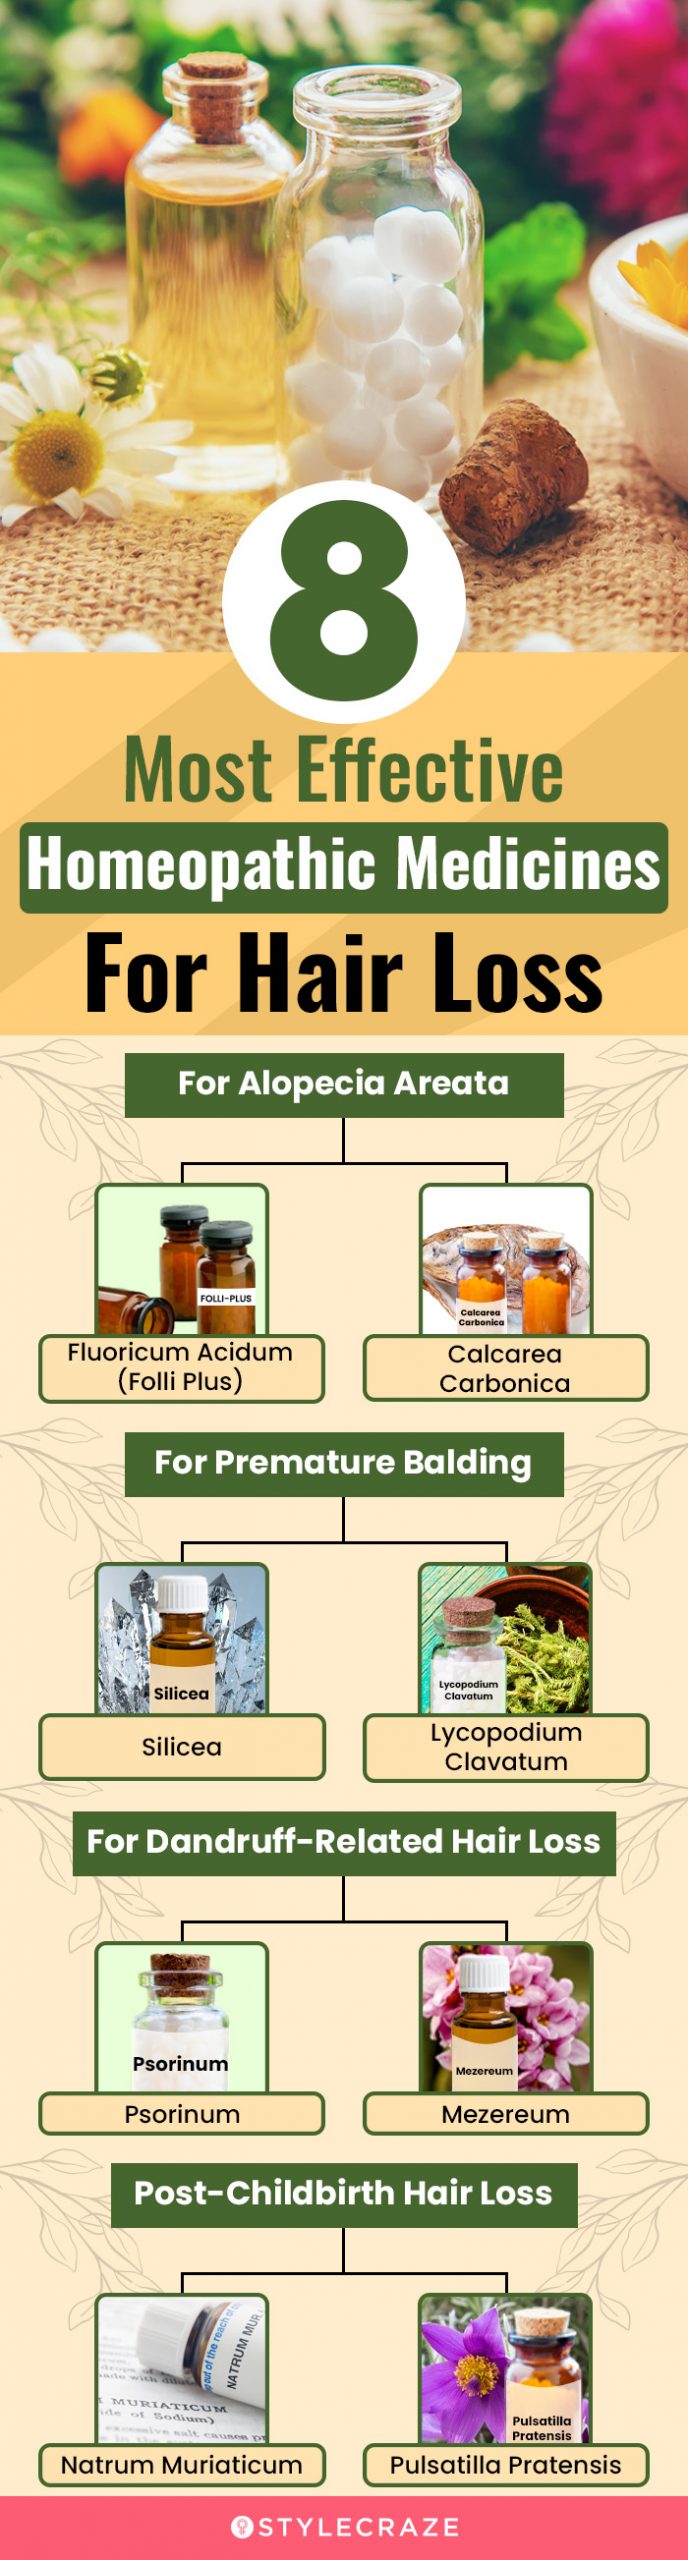 8 most effective homeopathic medicines for hair loss (infographic)